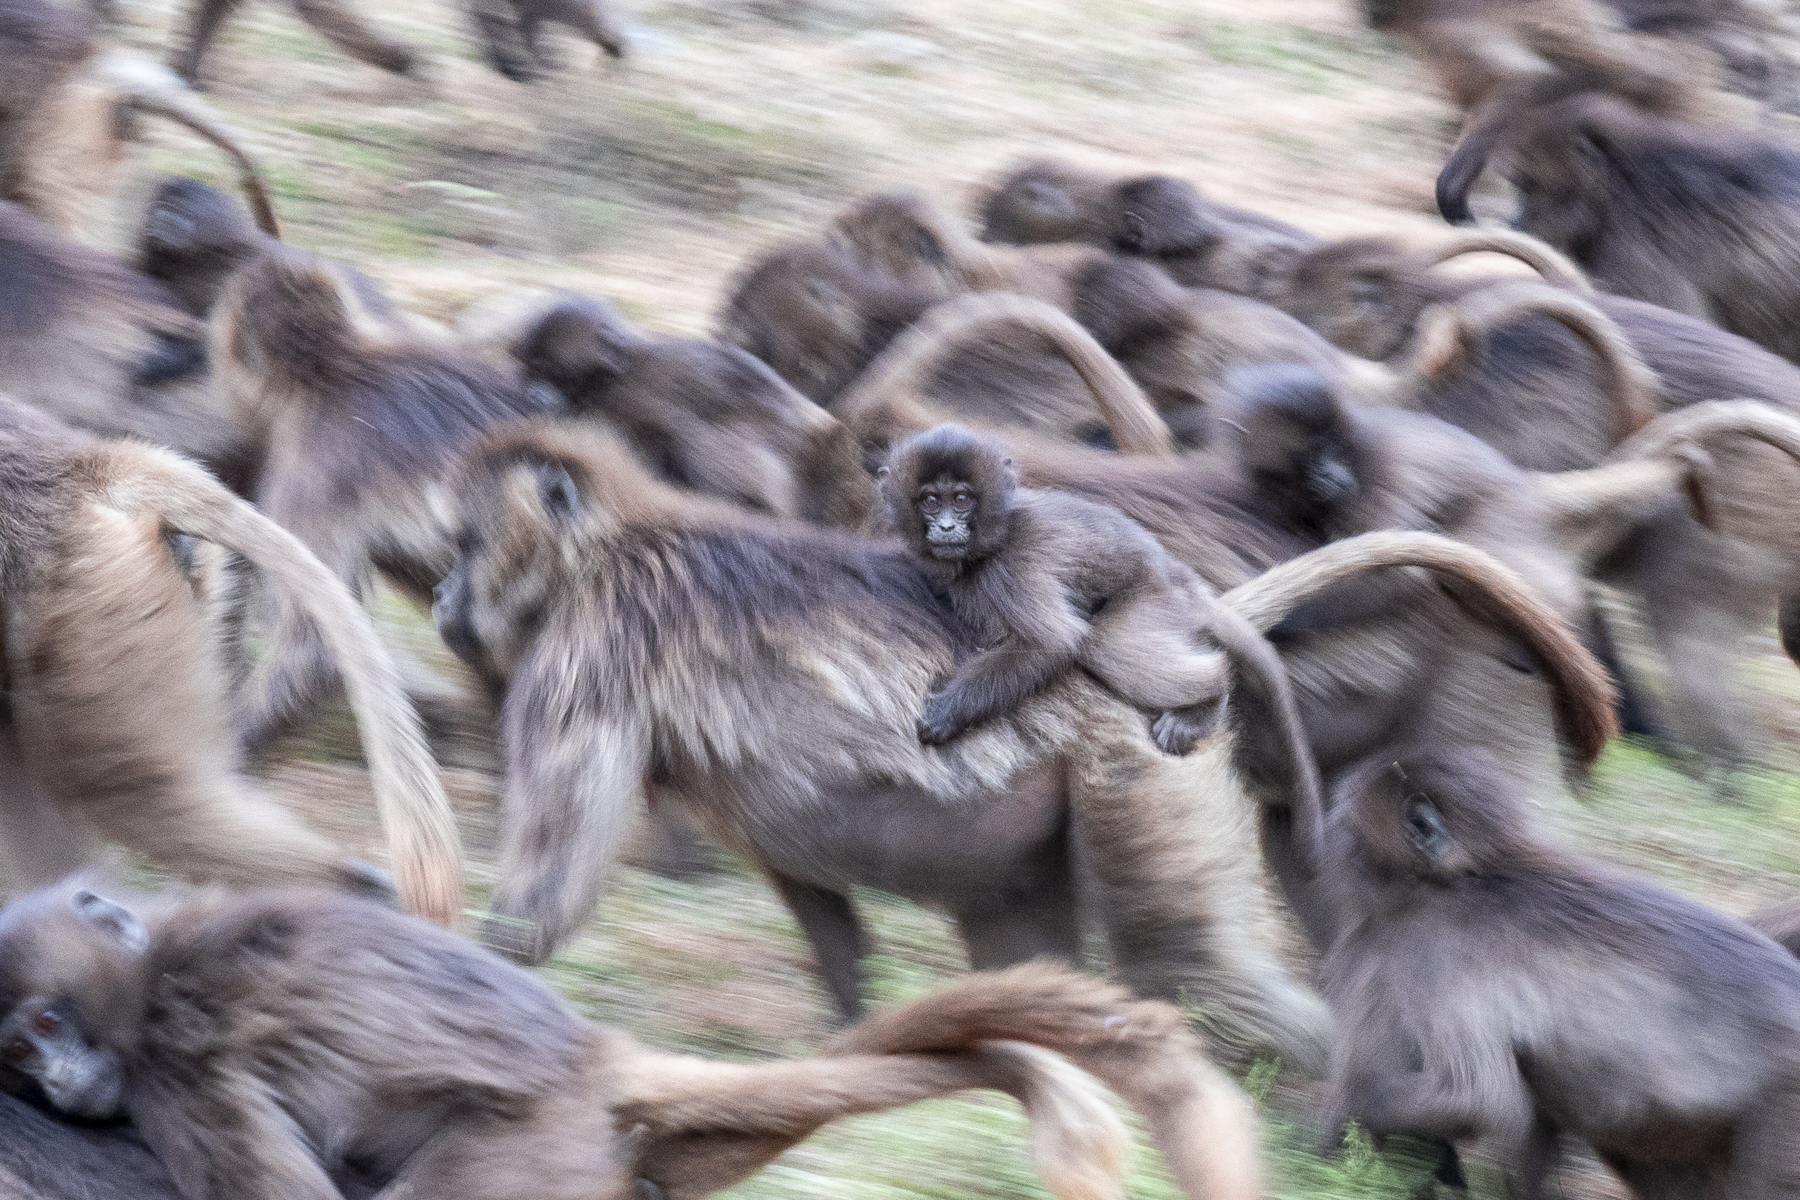 Night is coming, we must head for the cliffs! Gelada motion blur, all but one... (image by Mark Beaman)